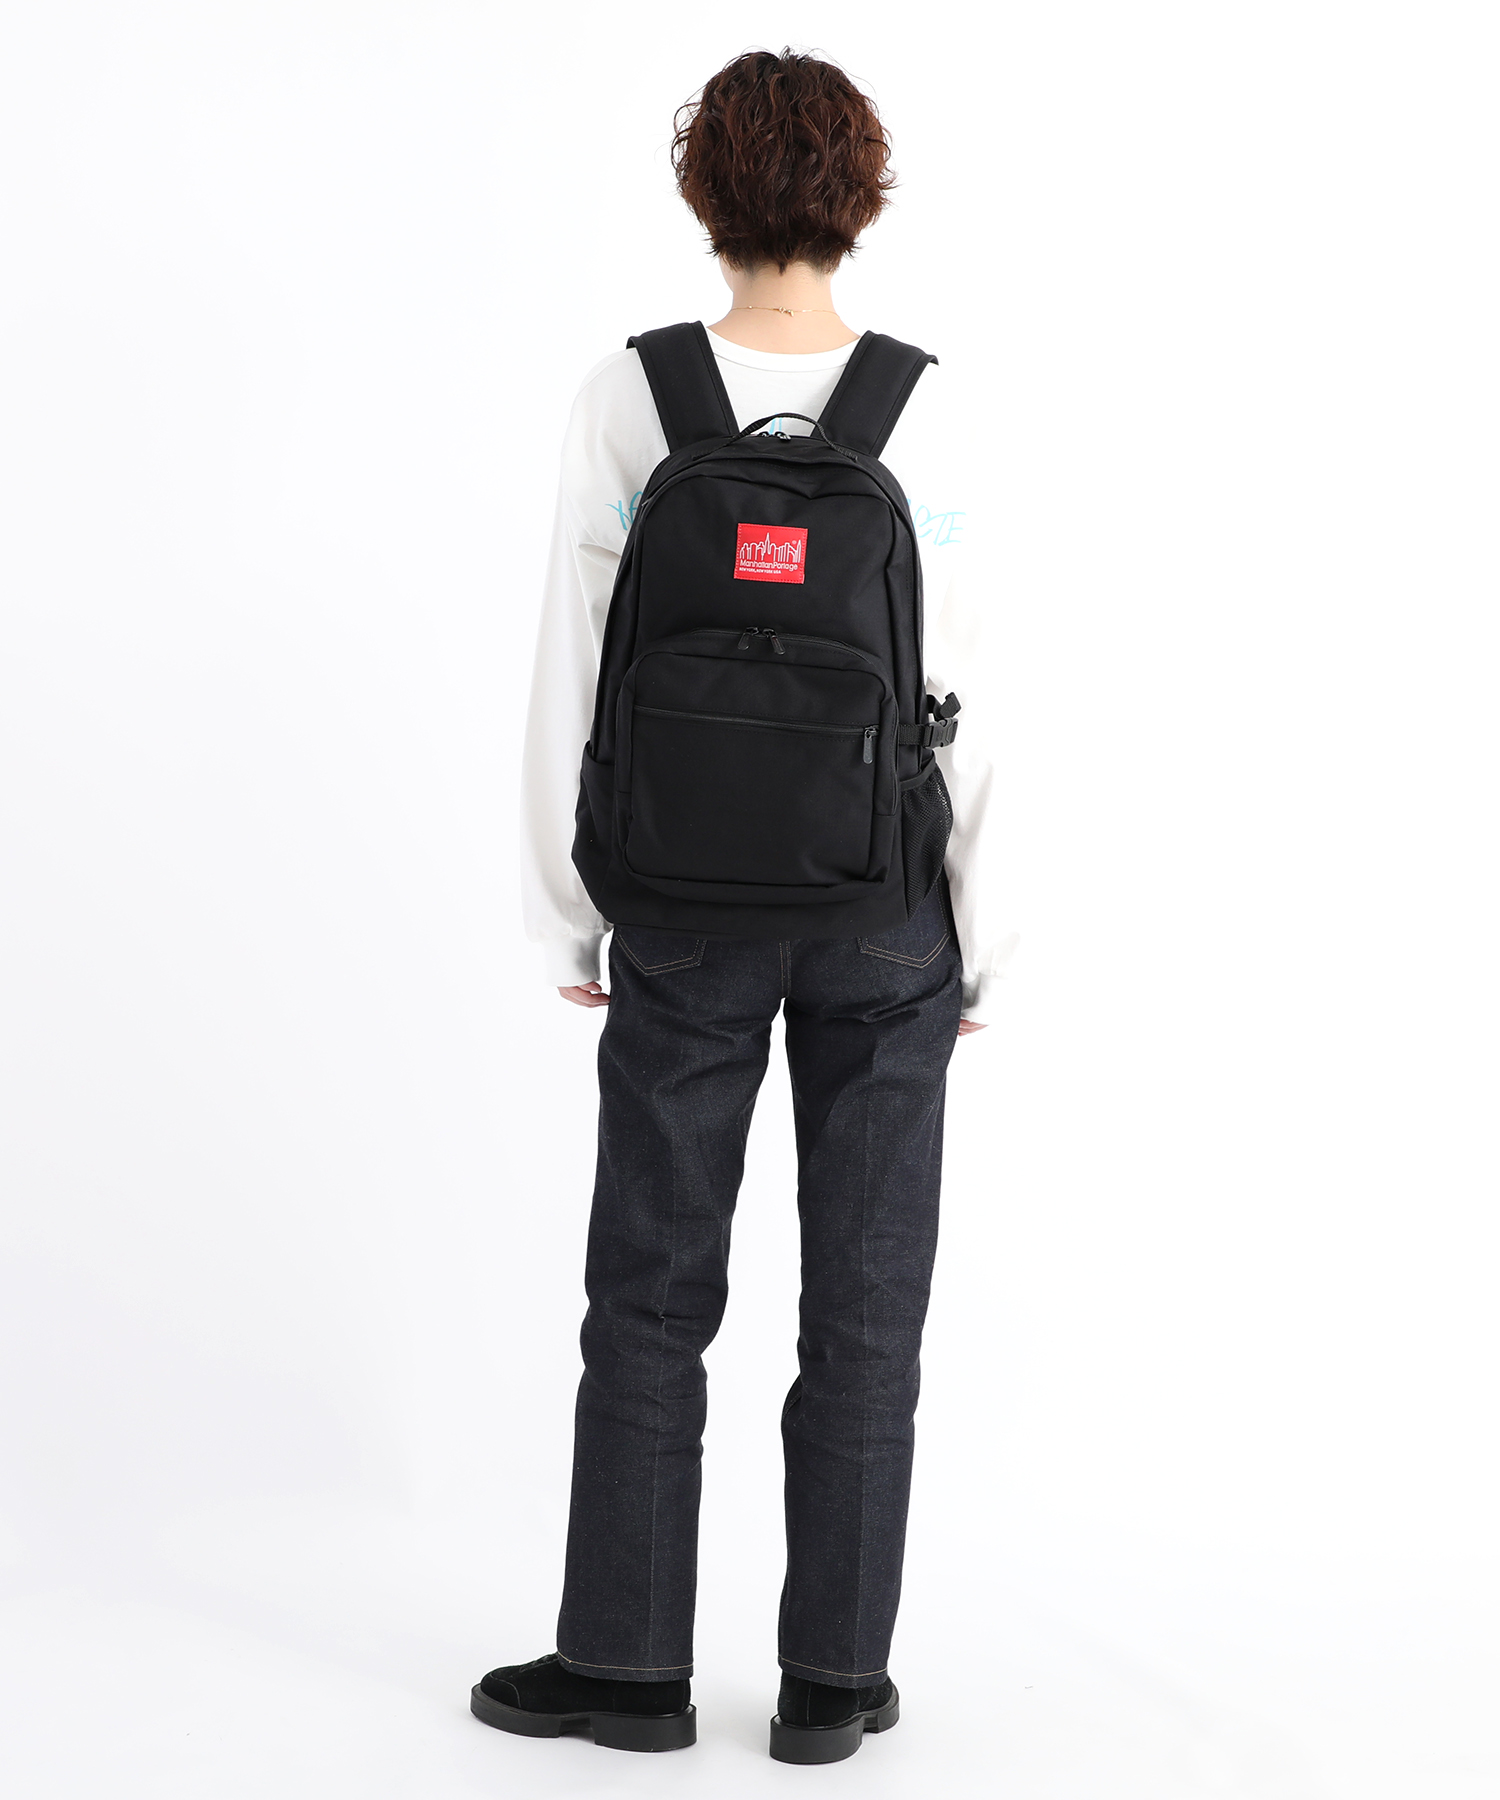 Townsend Backpack